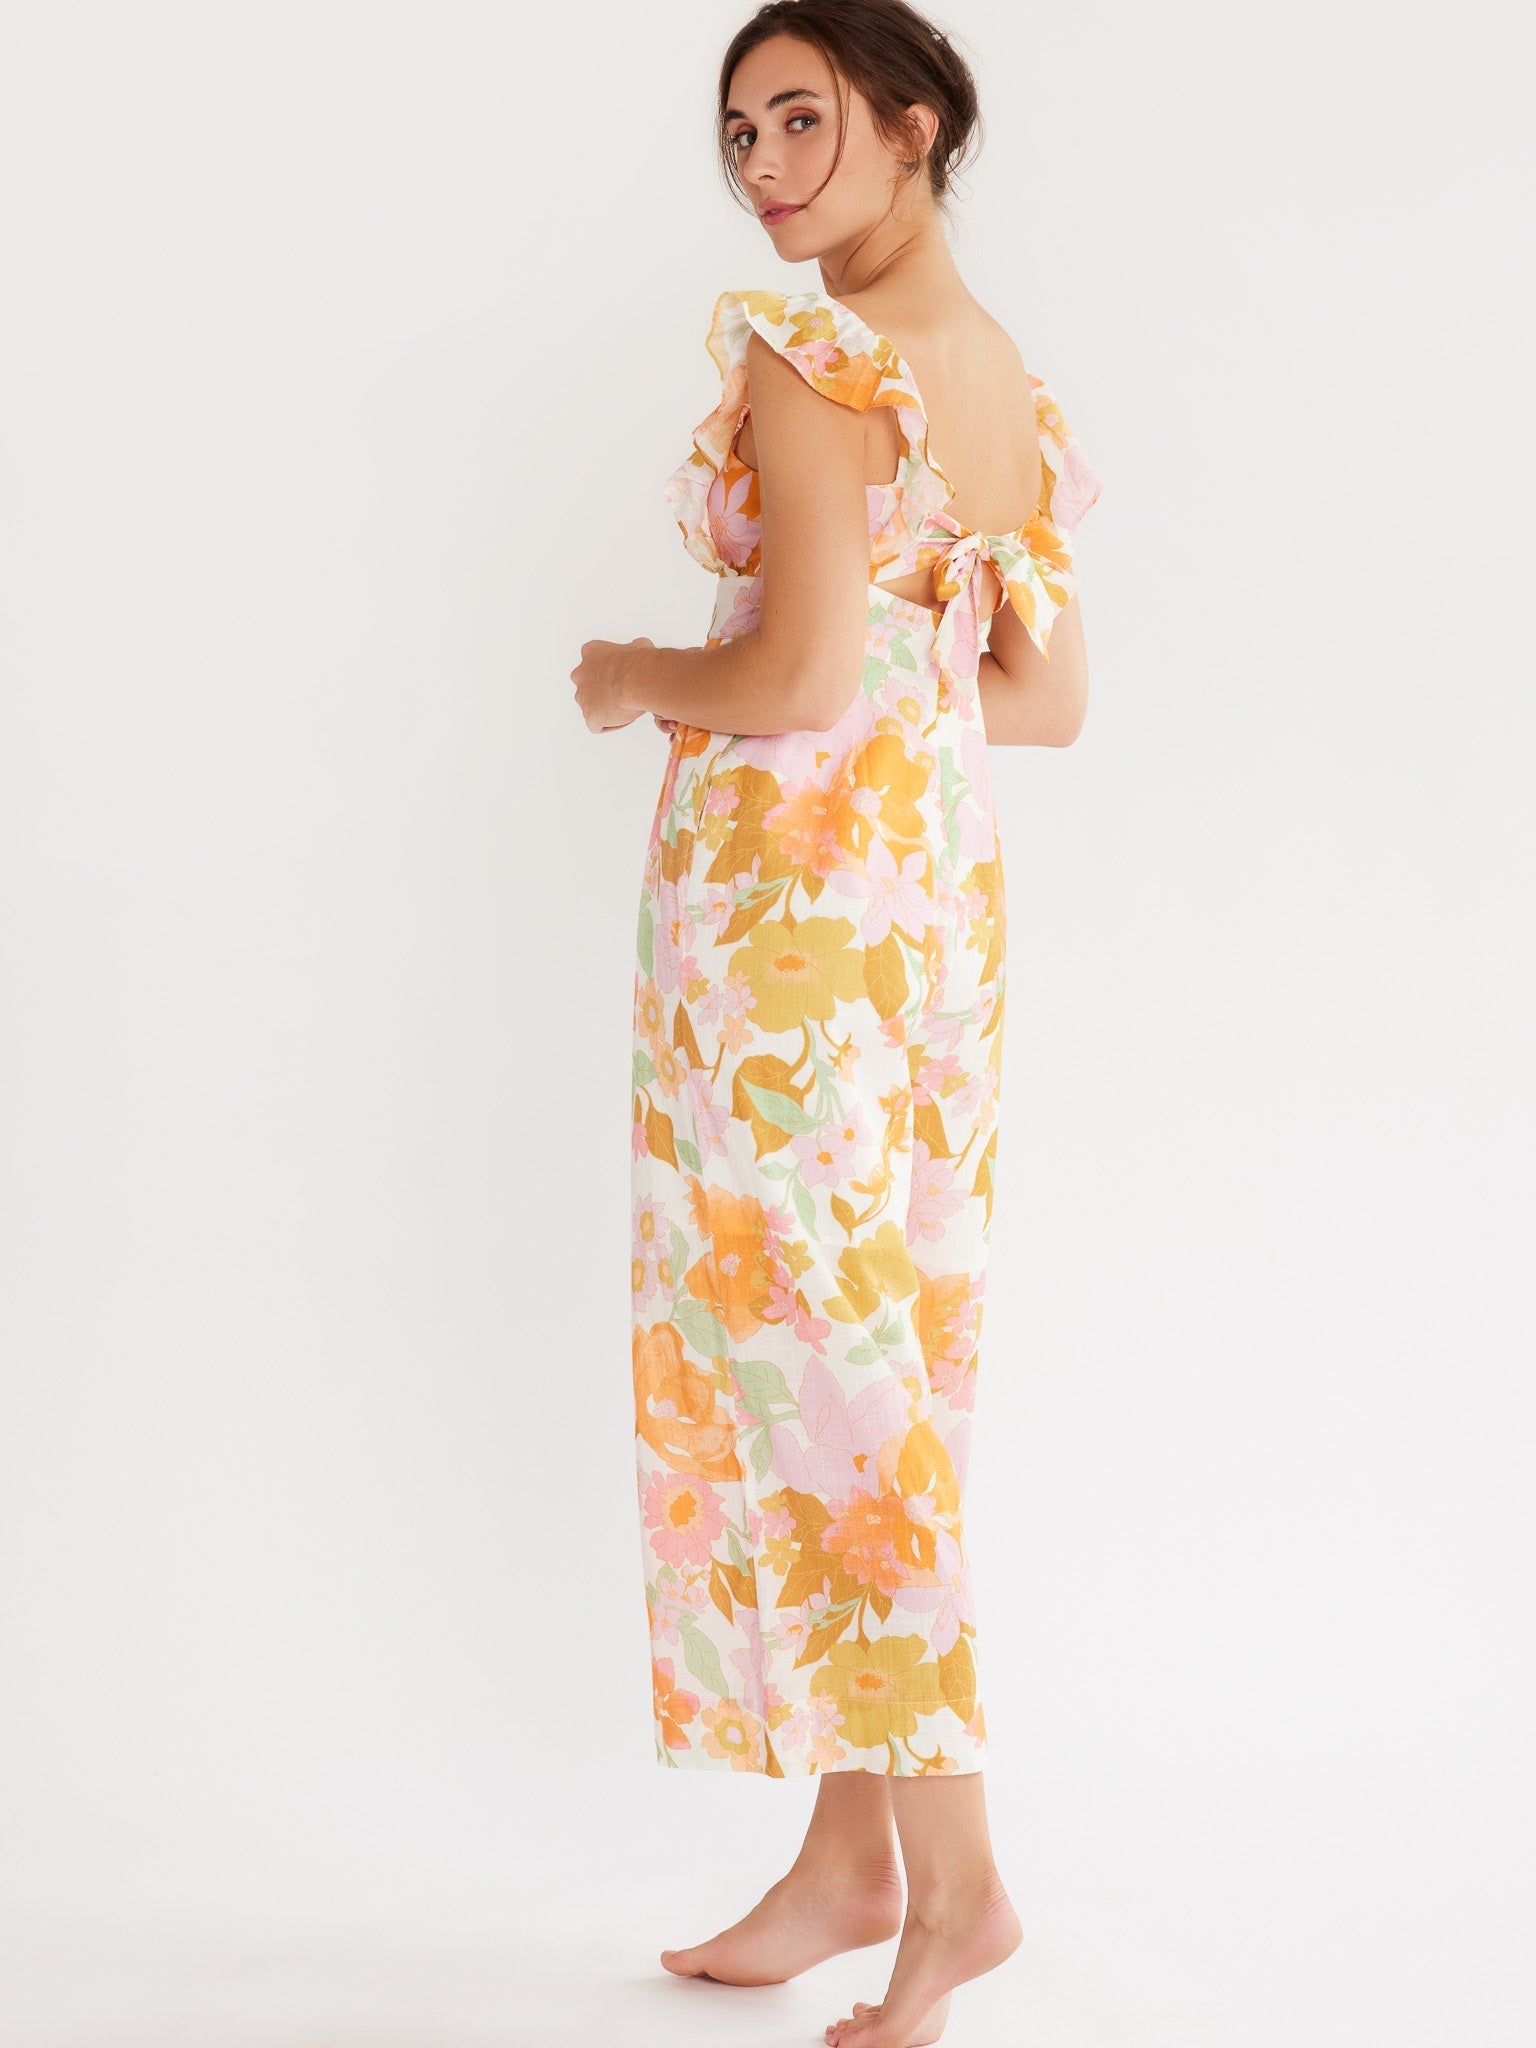 MILLE Clothing Alessia Jumpsuit in Harmony Floral